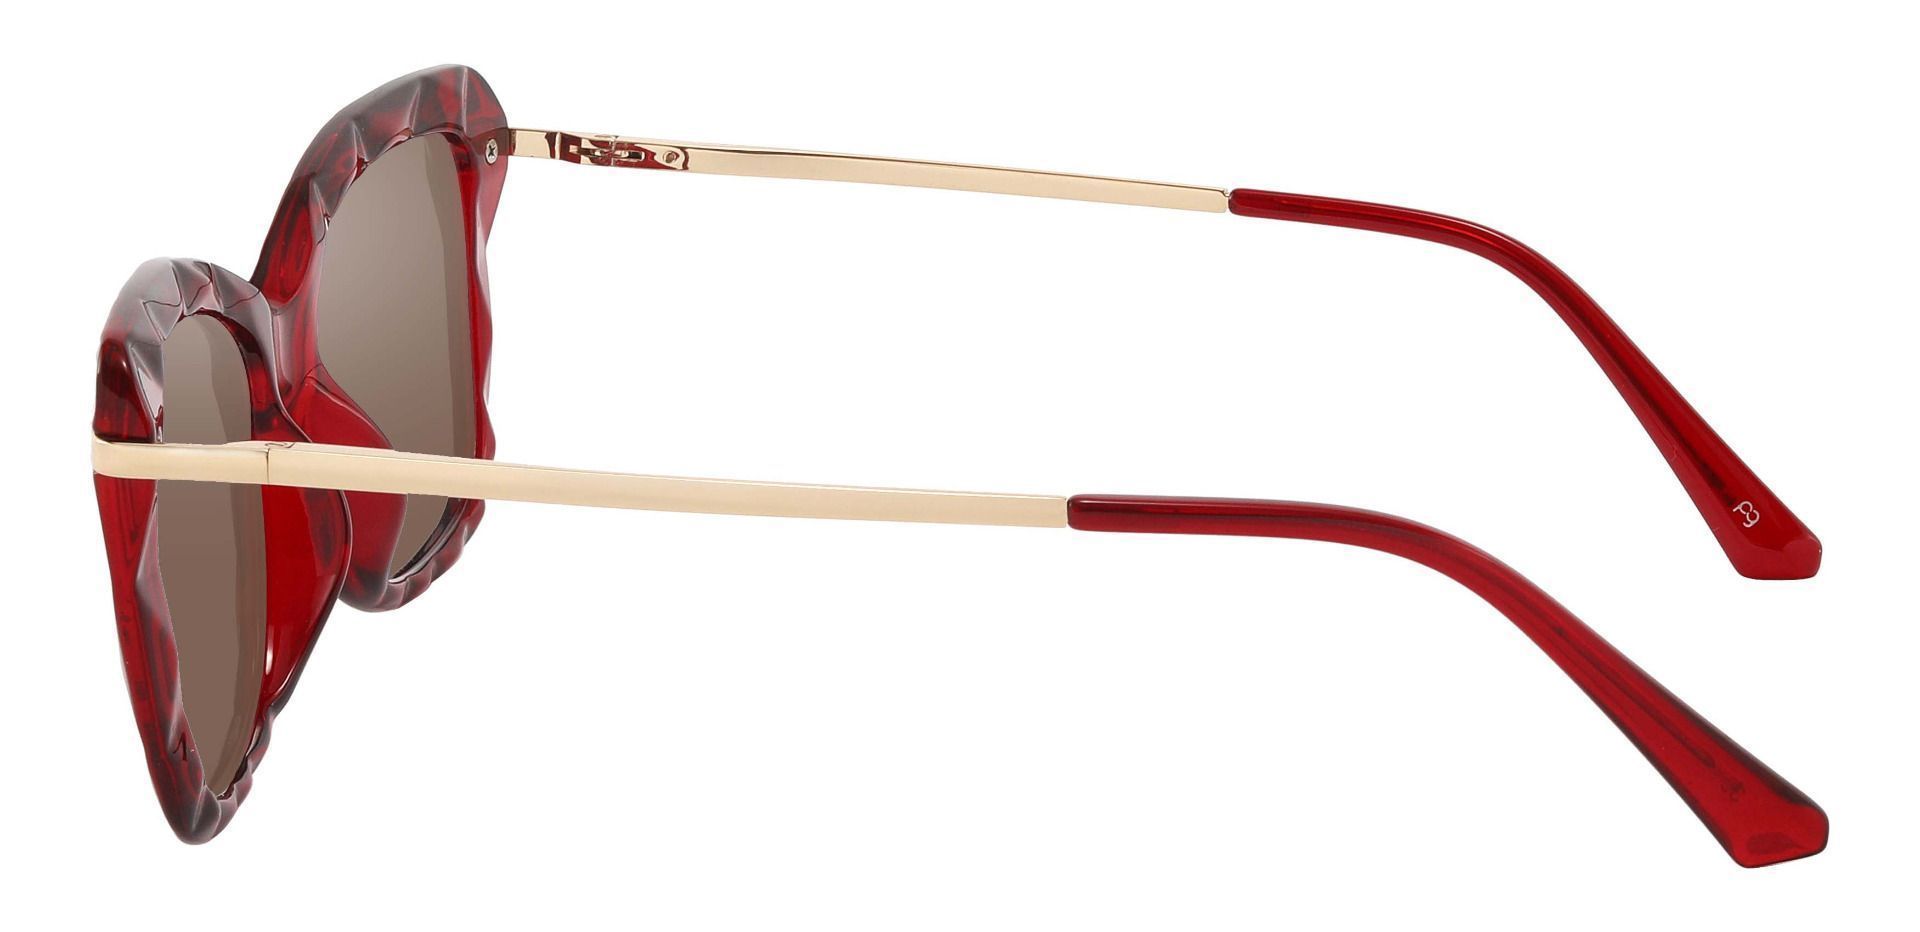 Shoshanna Rectangle Lined Bifocal Sunglasses - Red Frame With Brown Lenses